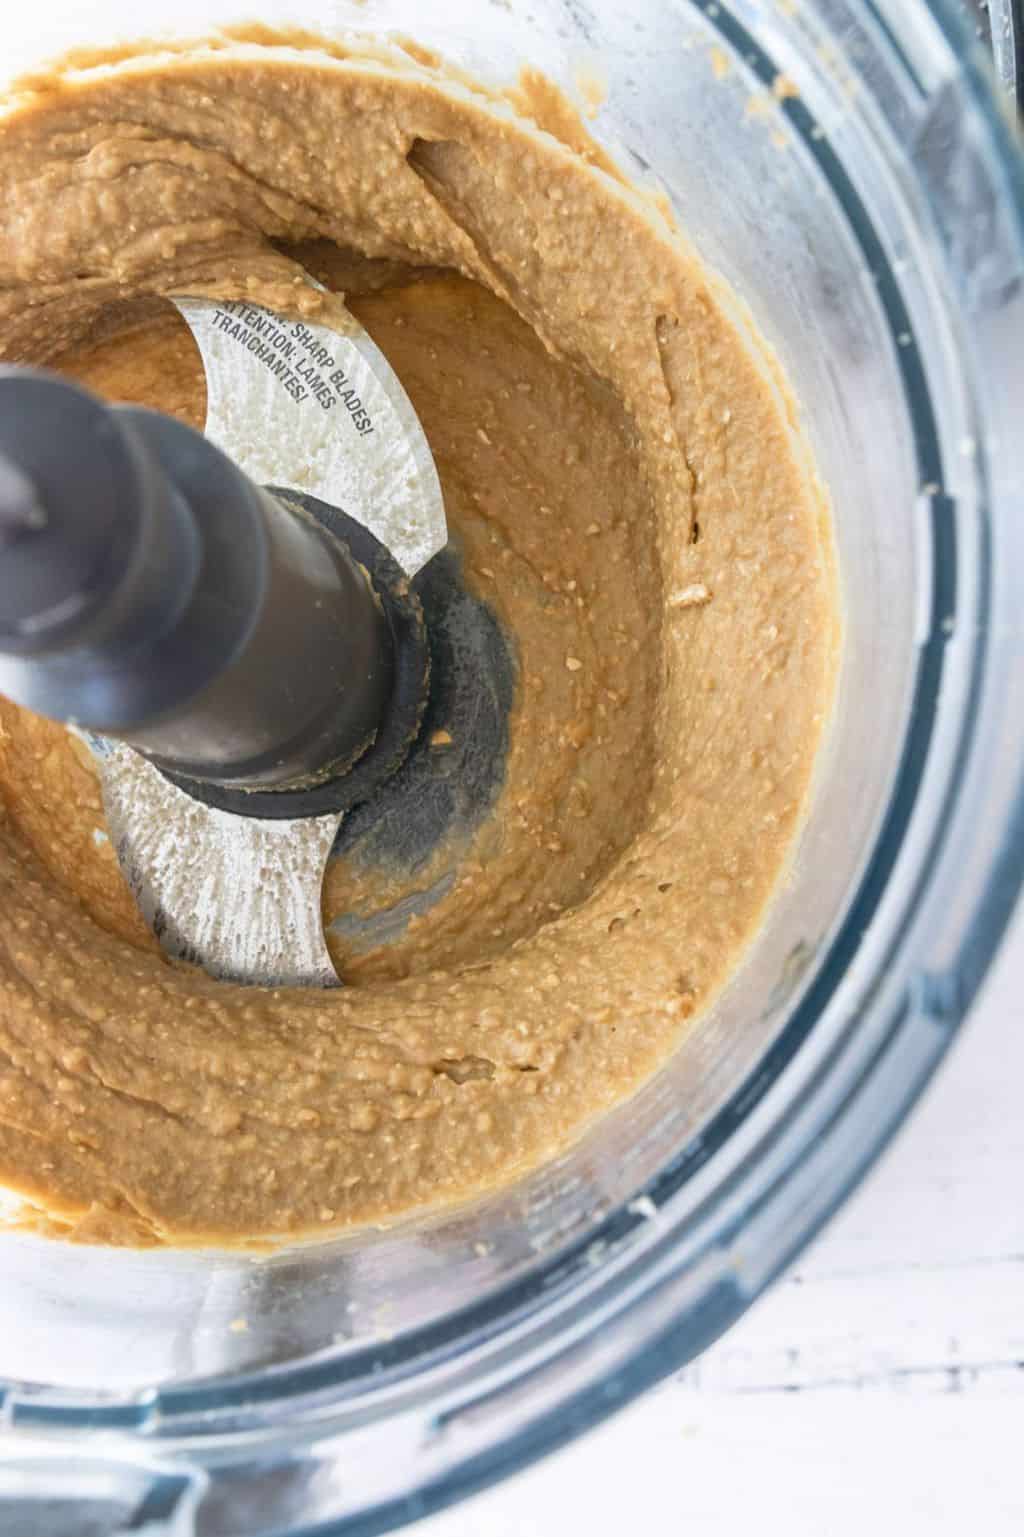 Grind Chickpeas, nut butter, sweetener, salt, baking powder, and oats, and vanilla extract in the bowl of a food processor for the Chickpea Cookie Dough